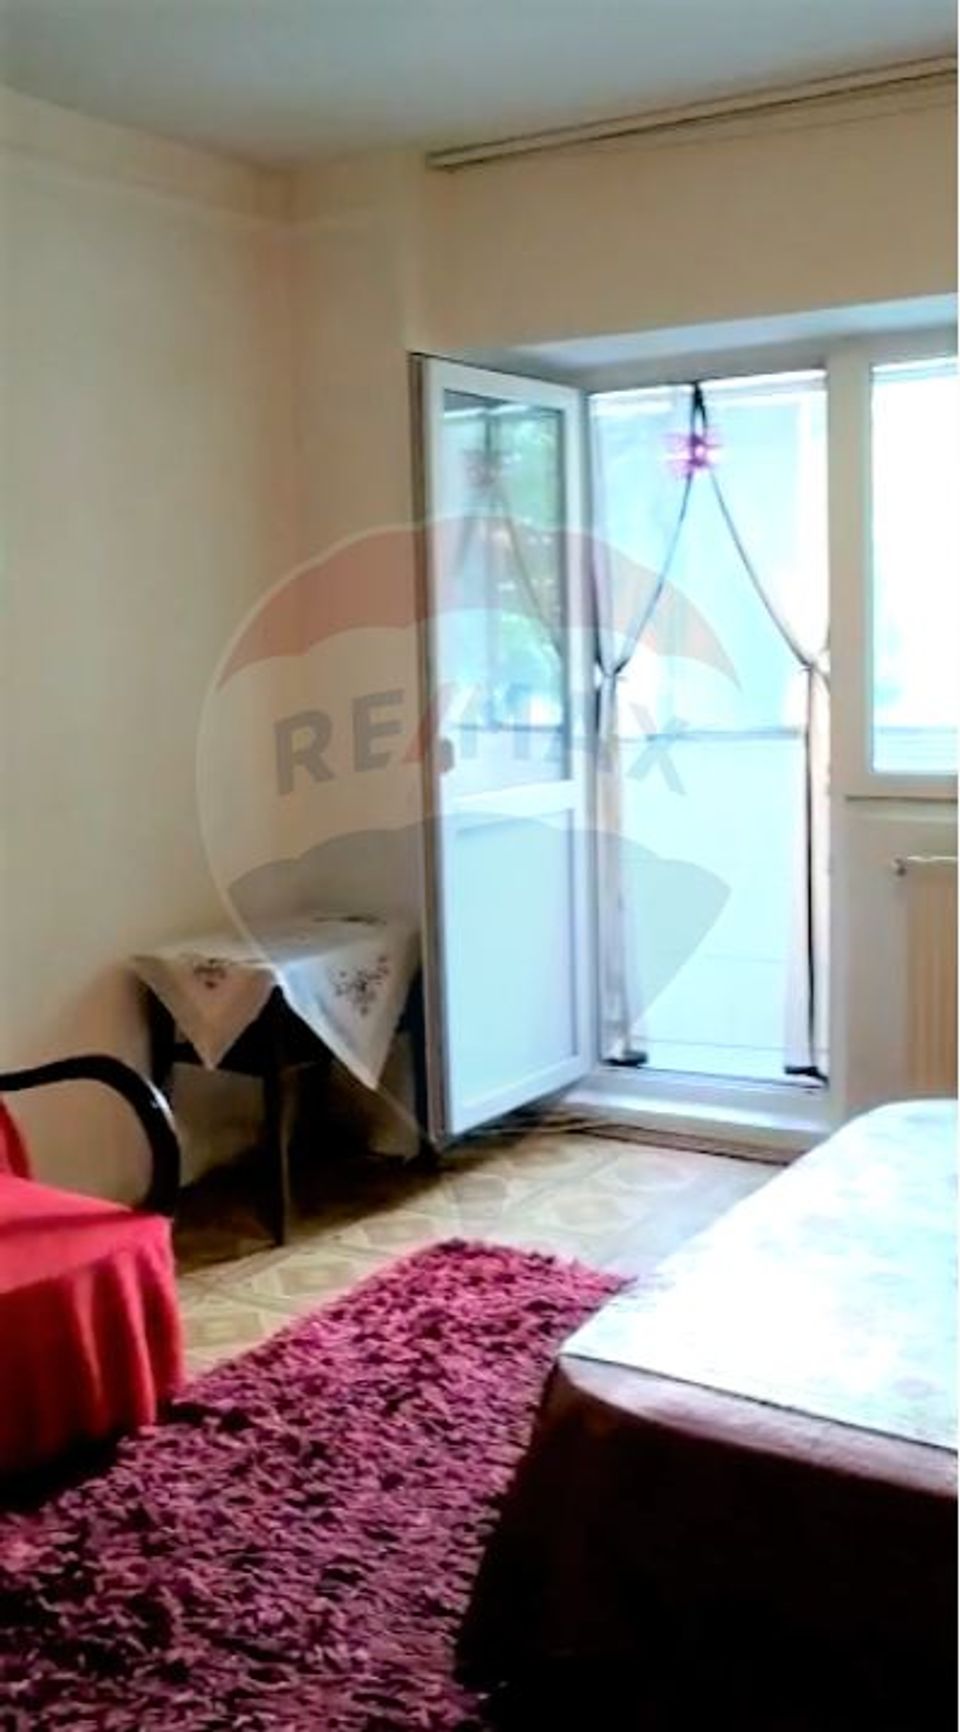 Studio for rent in Tineretului, COMMISSION 0% for tenants